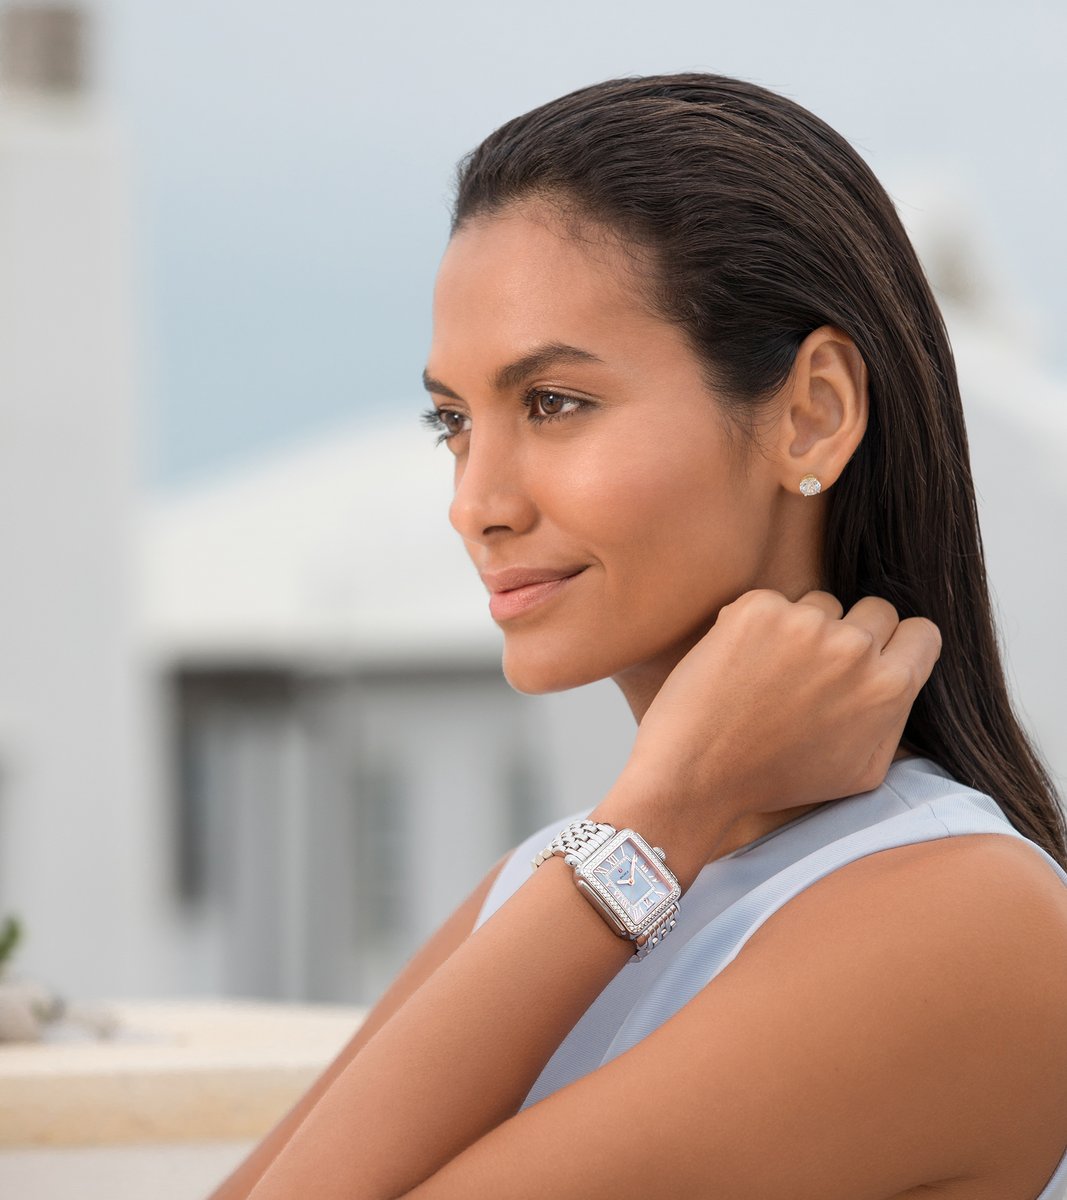 Don't forget to set your Michele watches ahead one hour tonight. We are dreaming of longer days and warmer nights. #TriceJewelers #Trice #MicheleWatches MICHELE @michelewatches #fashiontimepiece #aRealWatch